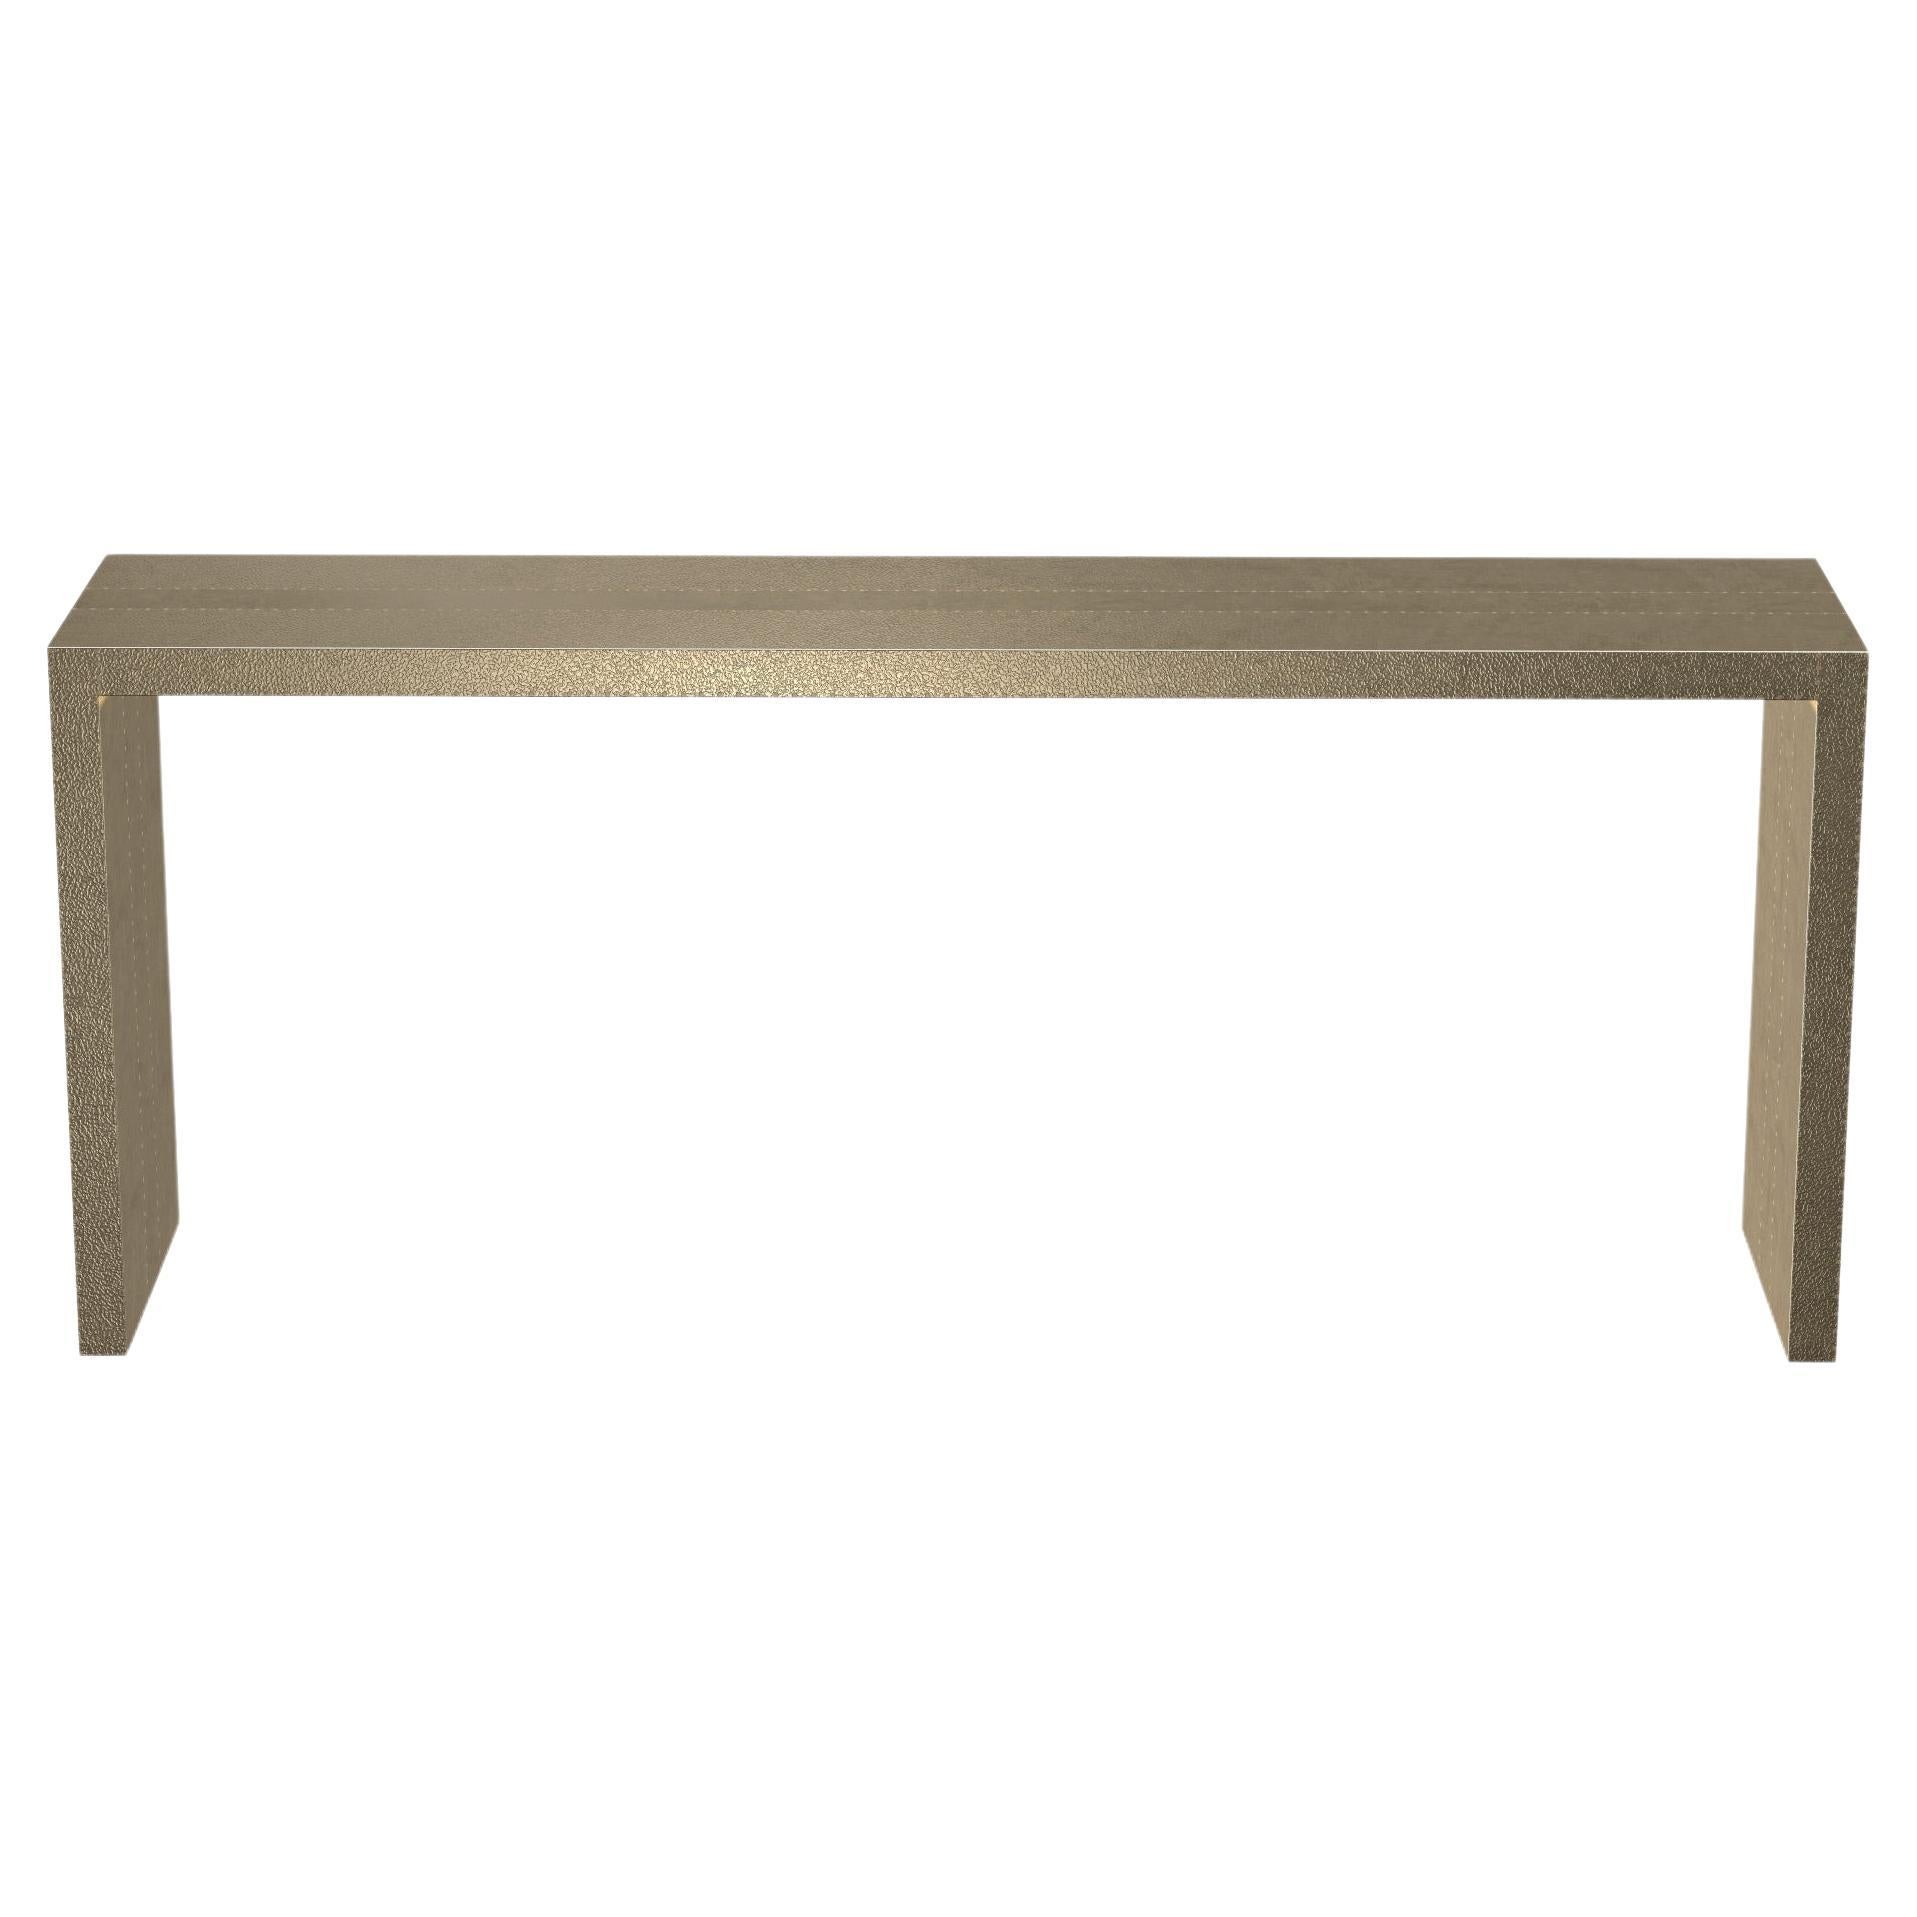 Art Deco Game Console Tables in Copper Fine Hammered by Alison Spear For Sale